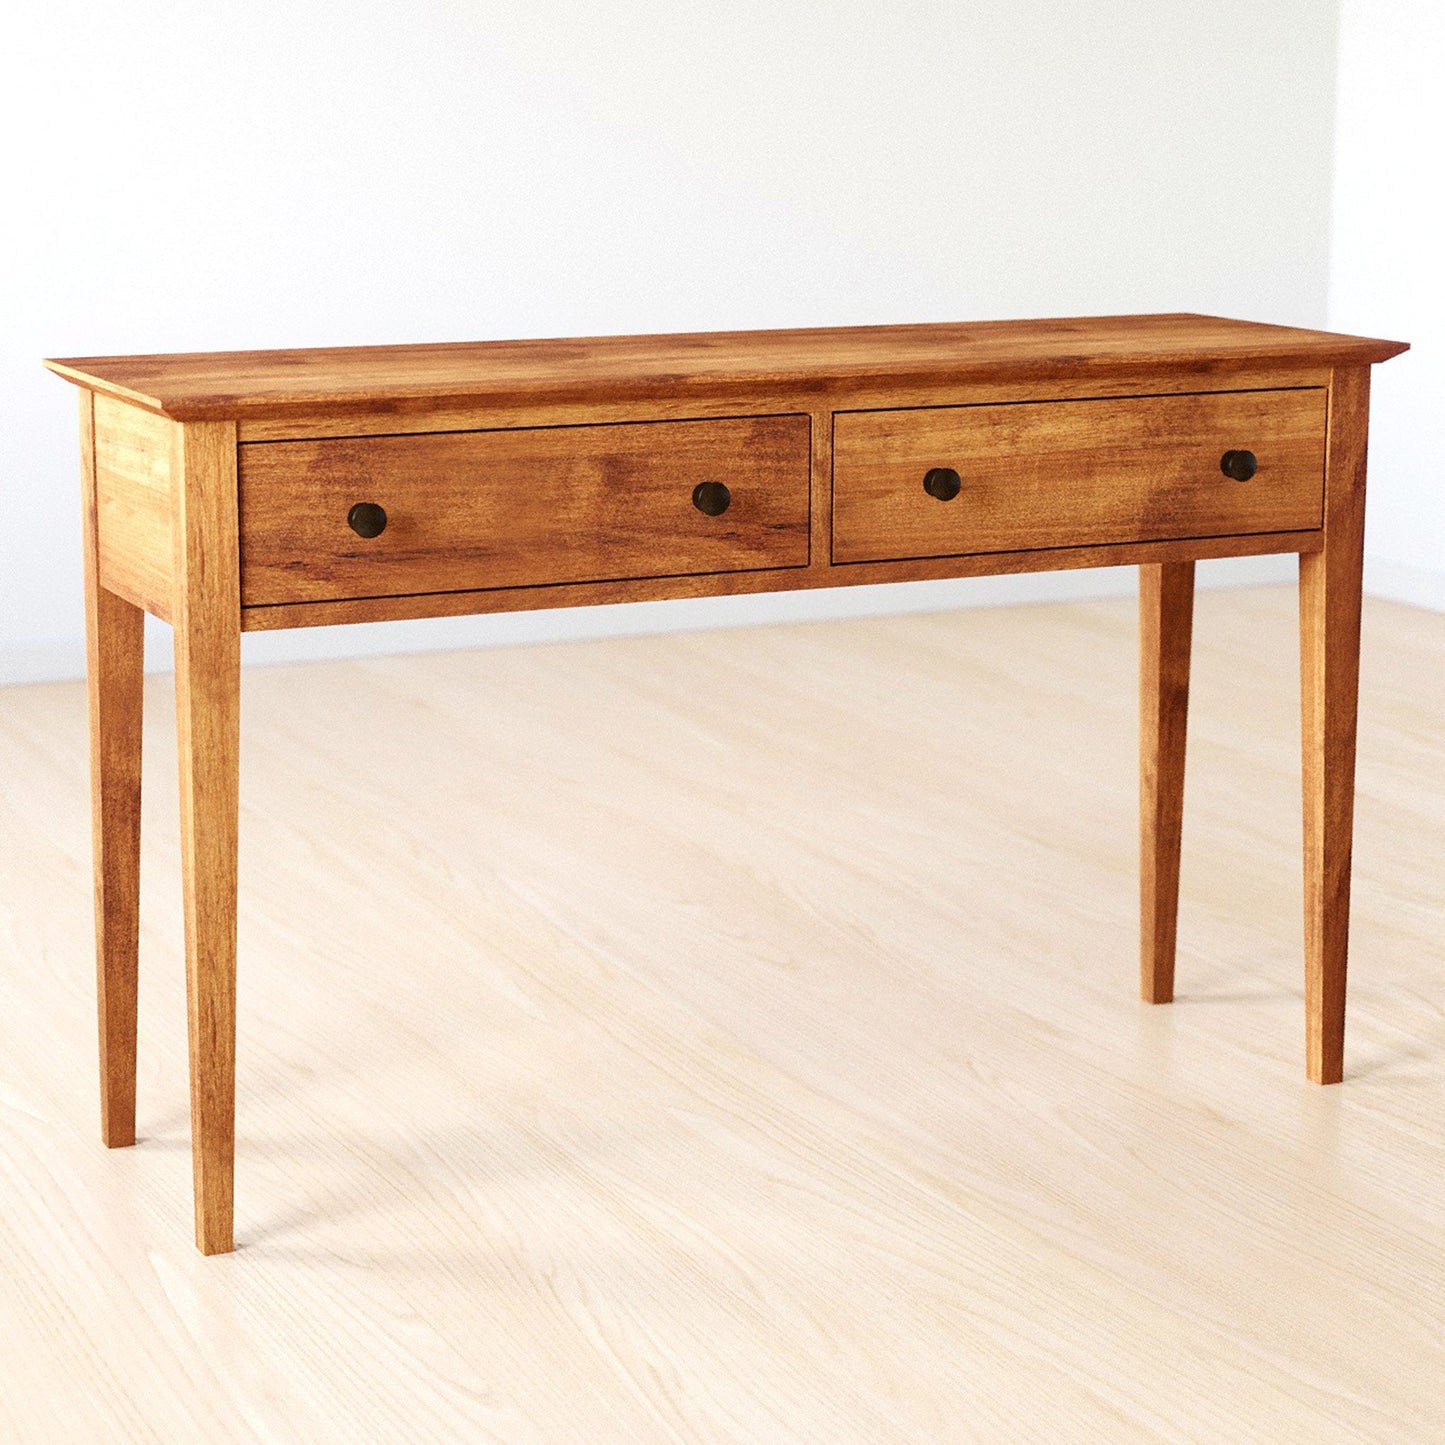 Gable Road Console Table